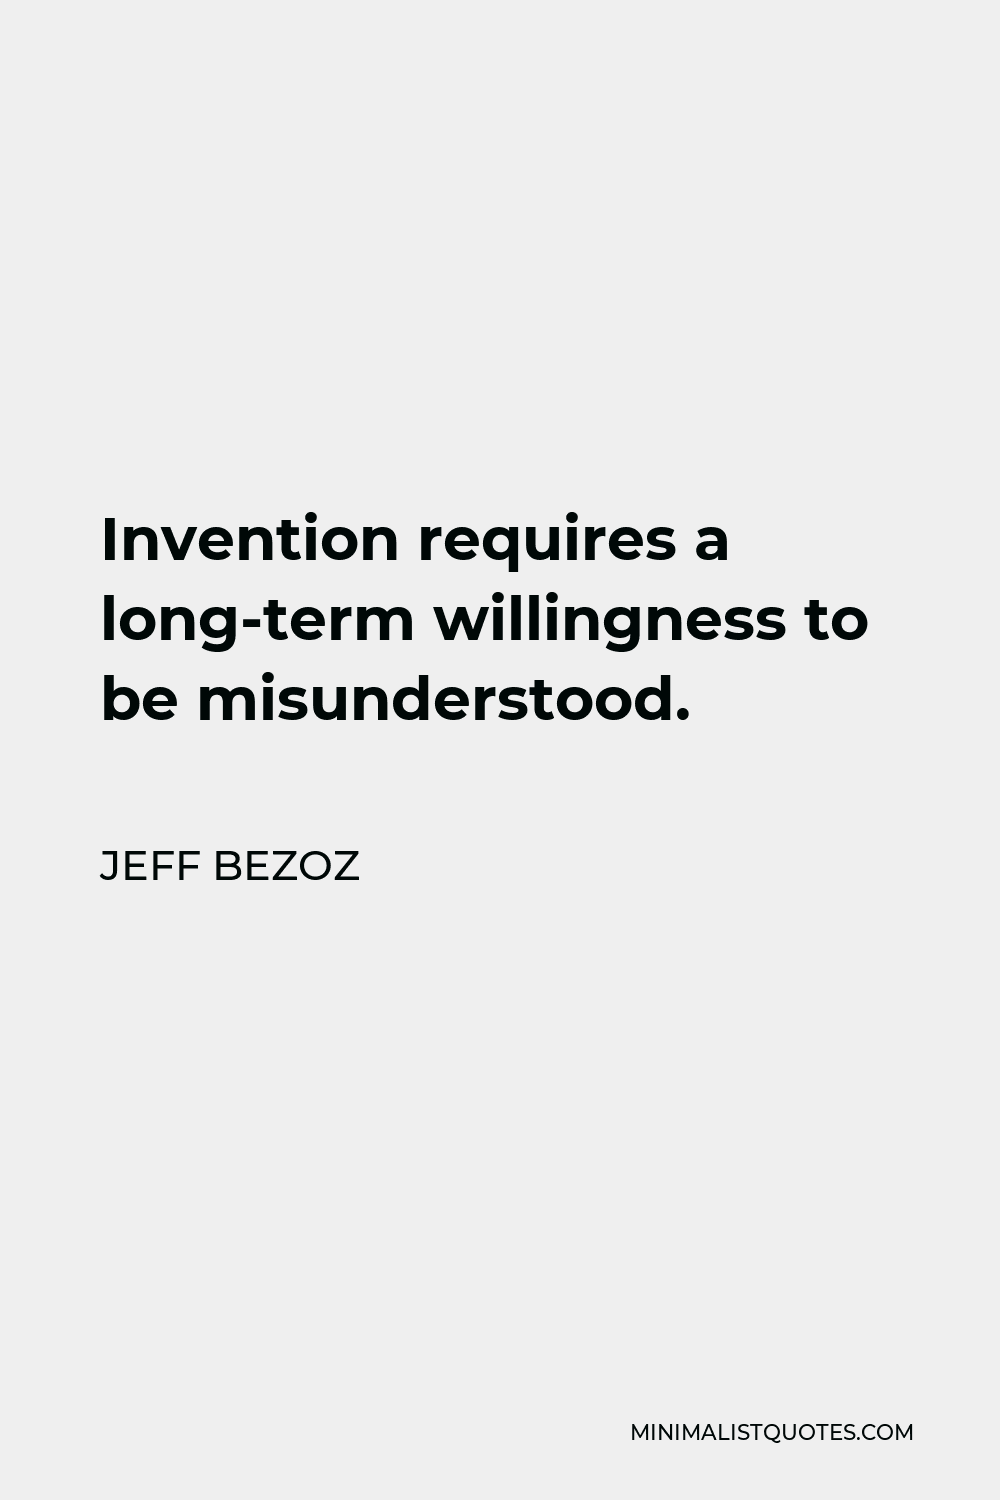 Jeff Bezoz Quote - Invention requires a long-term willingness to be misunderstood.